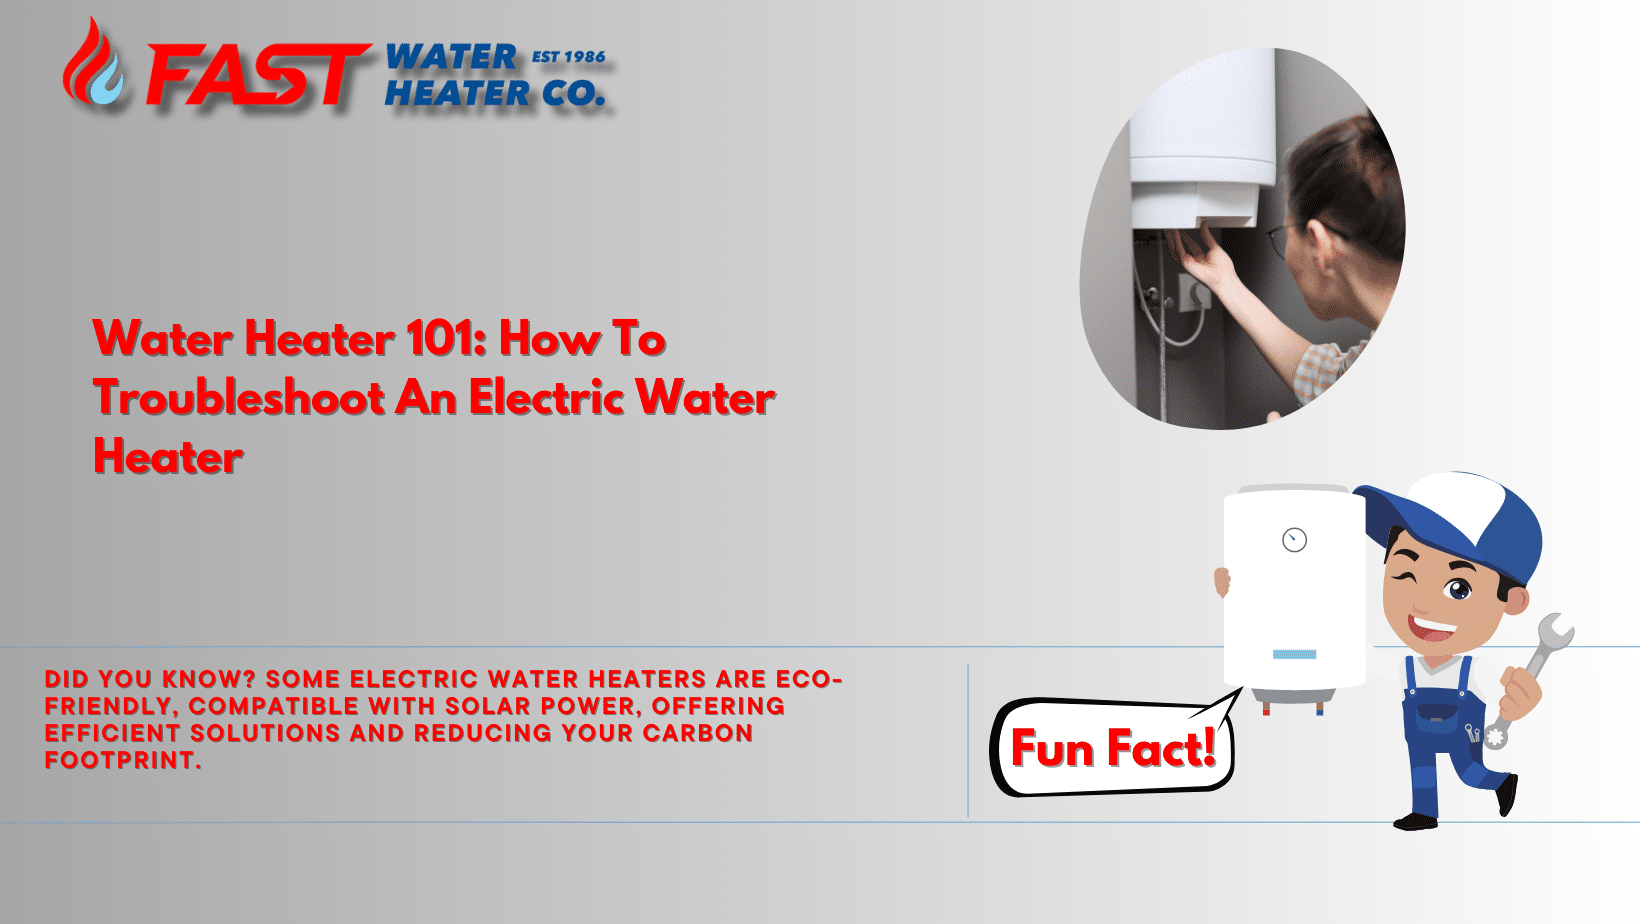 Water Heater 101: How To Troubleshoot An Electric Water Heater